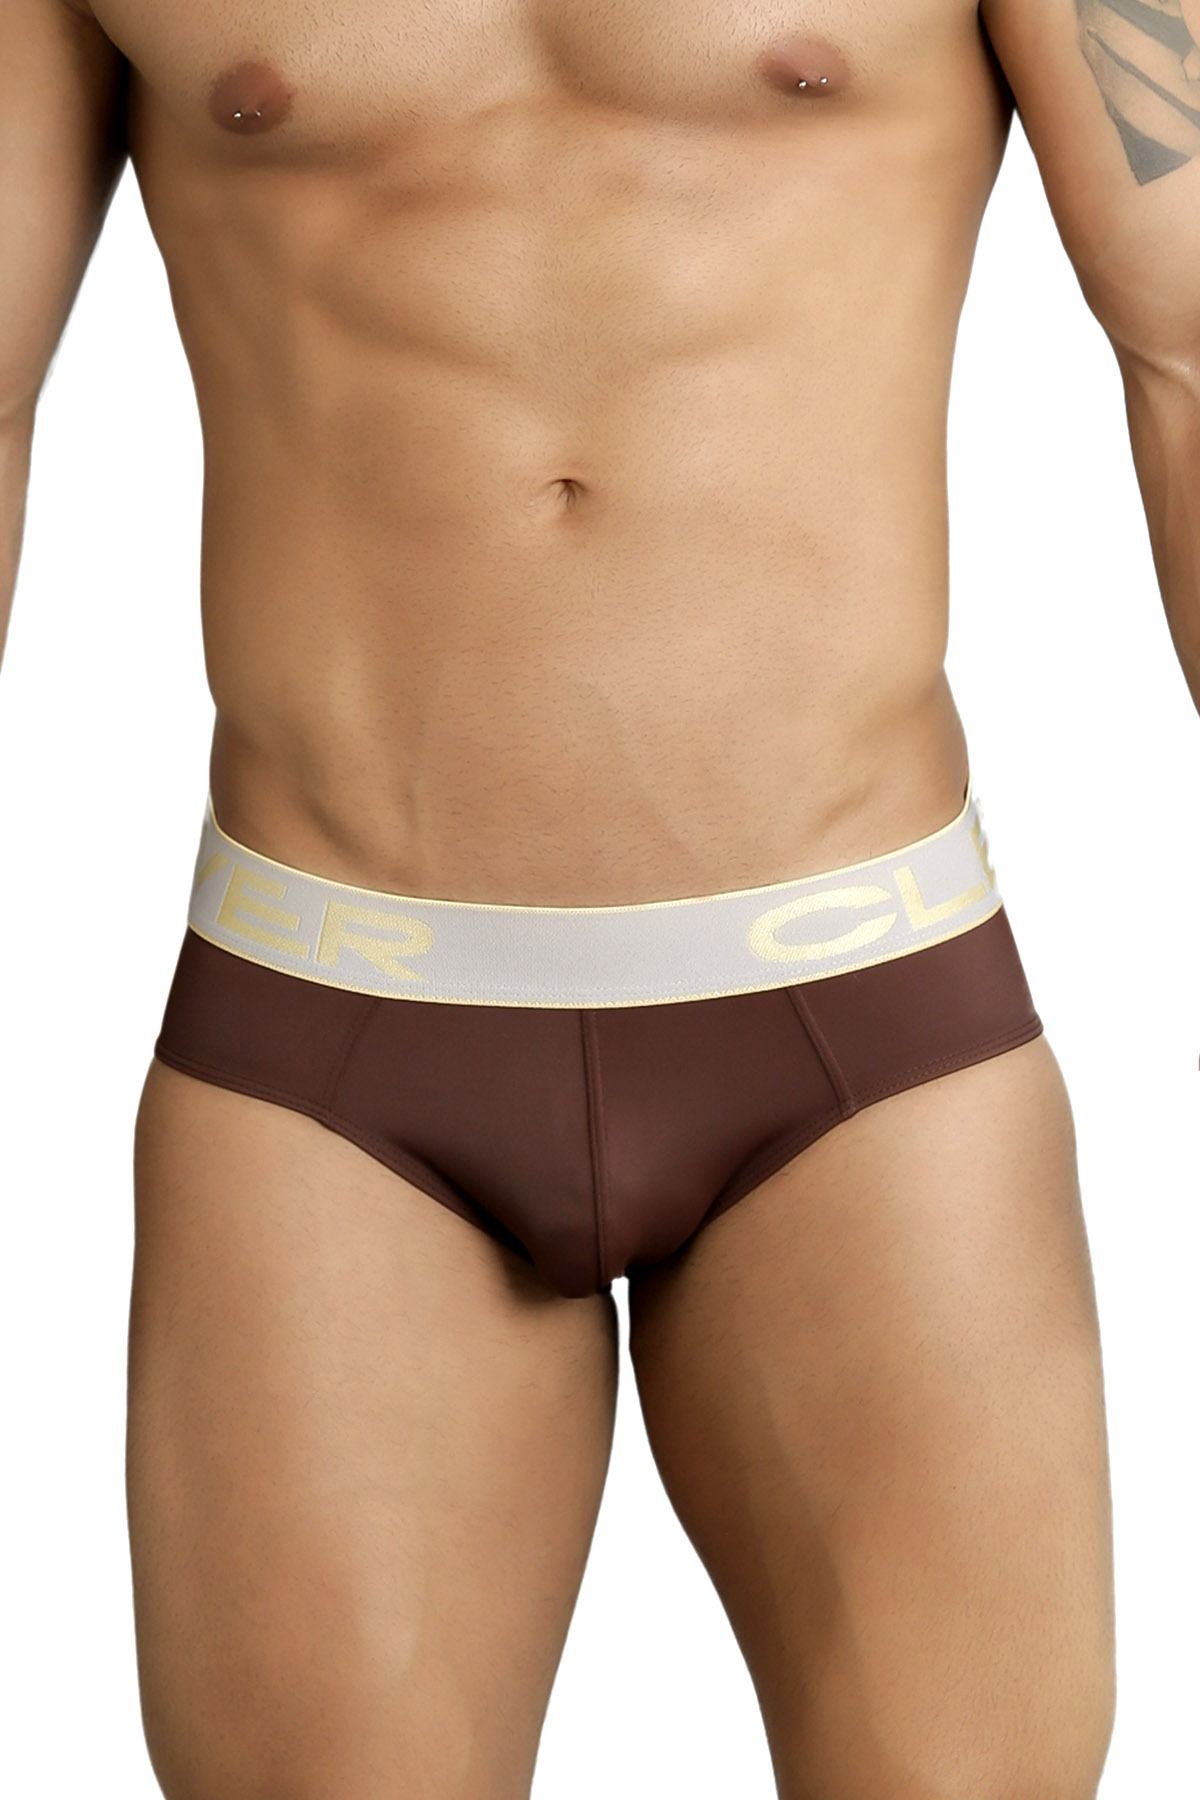 Clever Brown/Silver/Gold Limited Edition Latin Brief